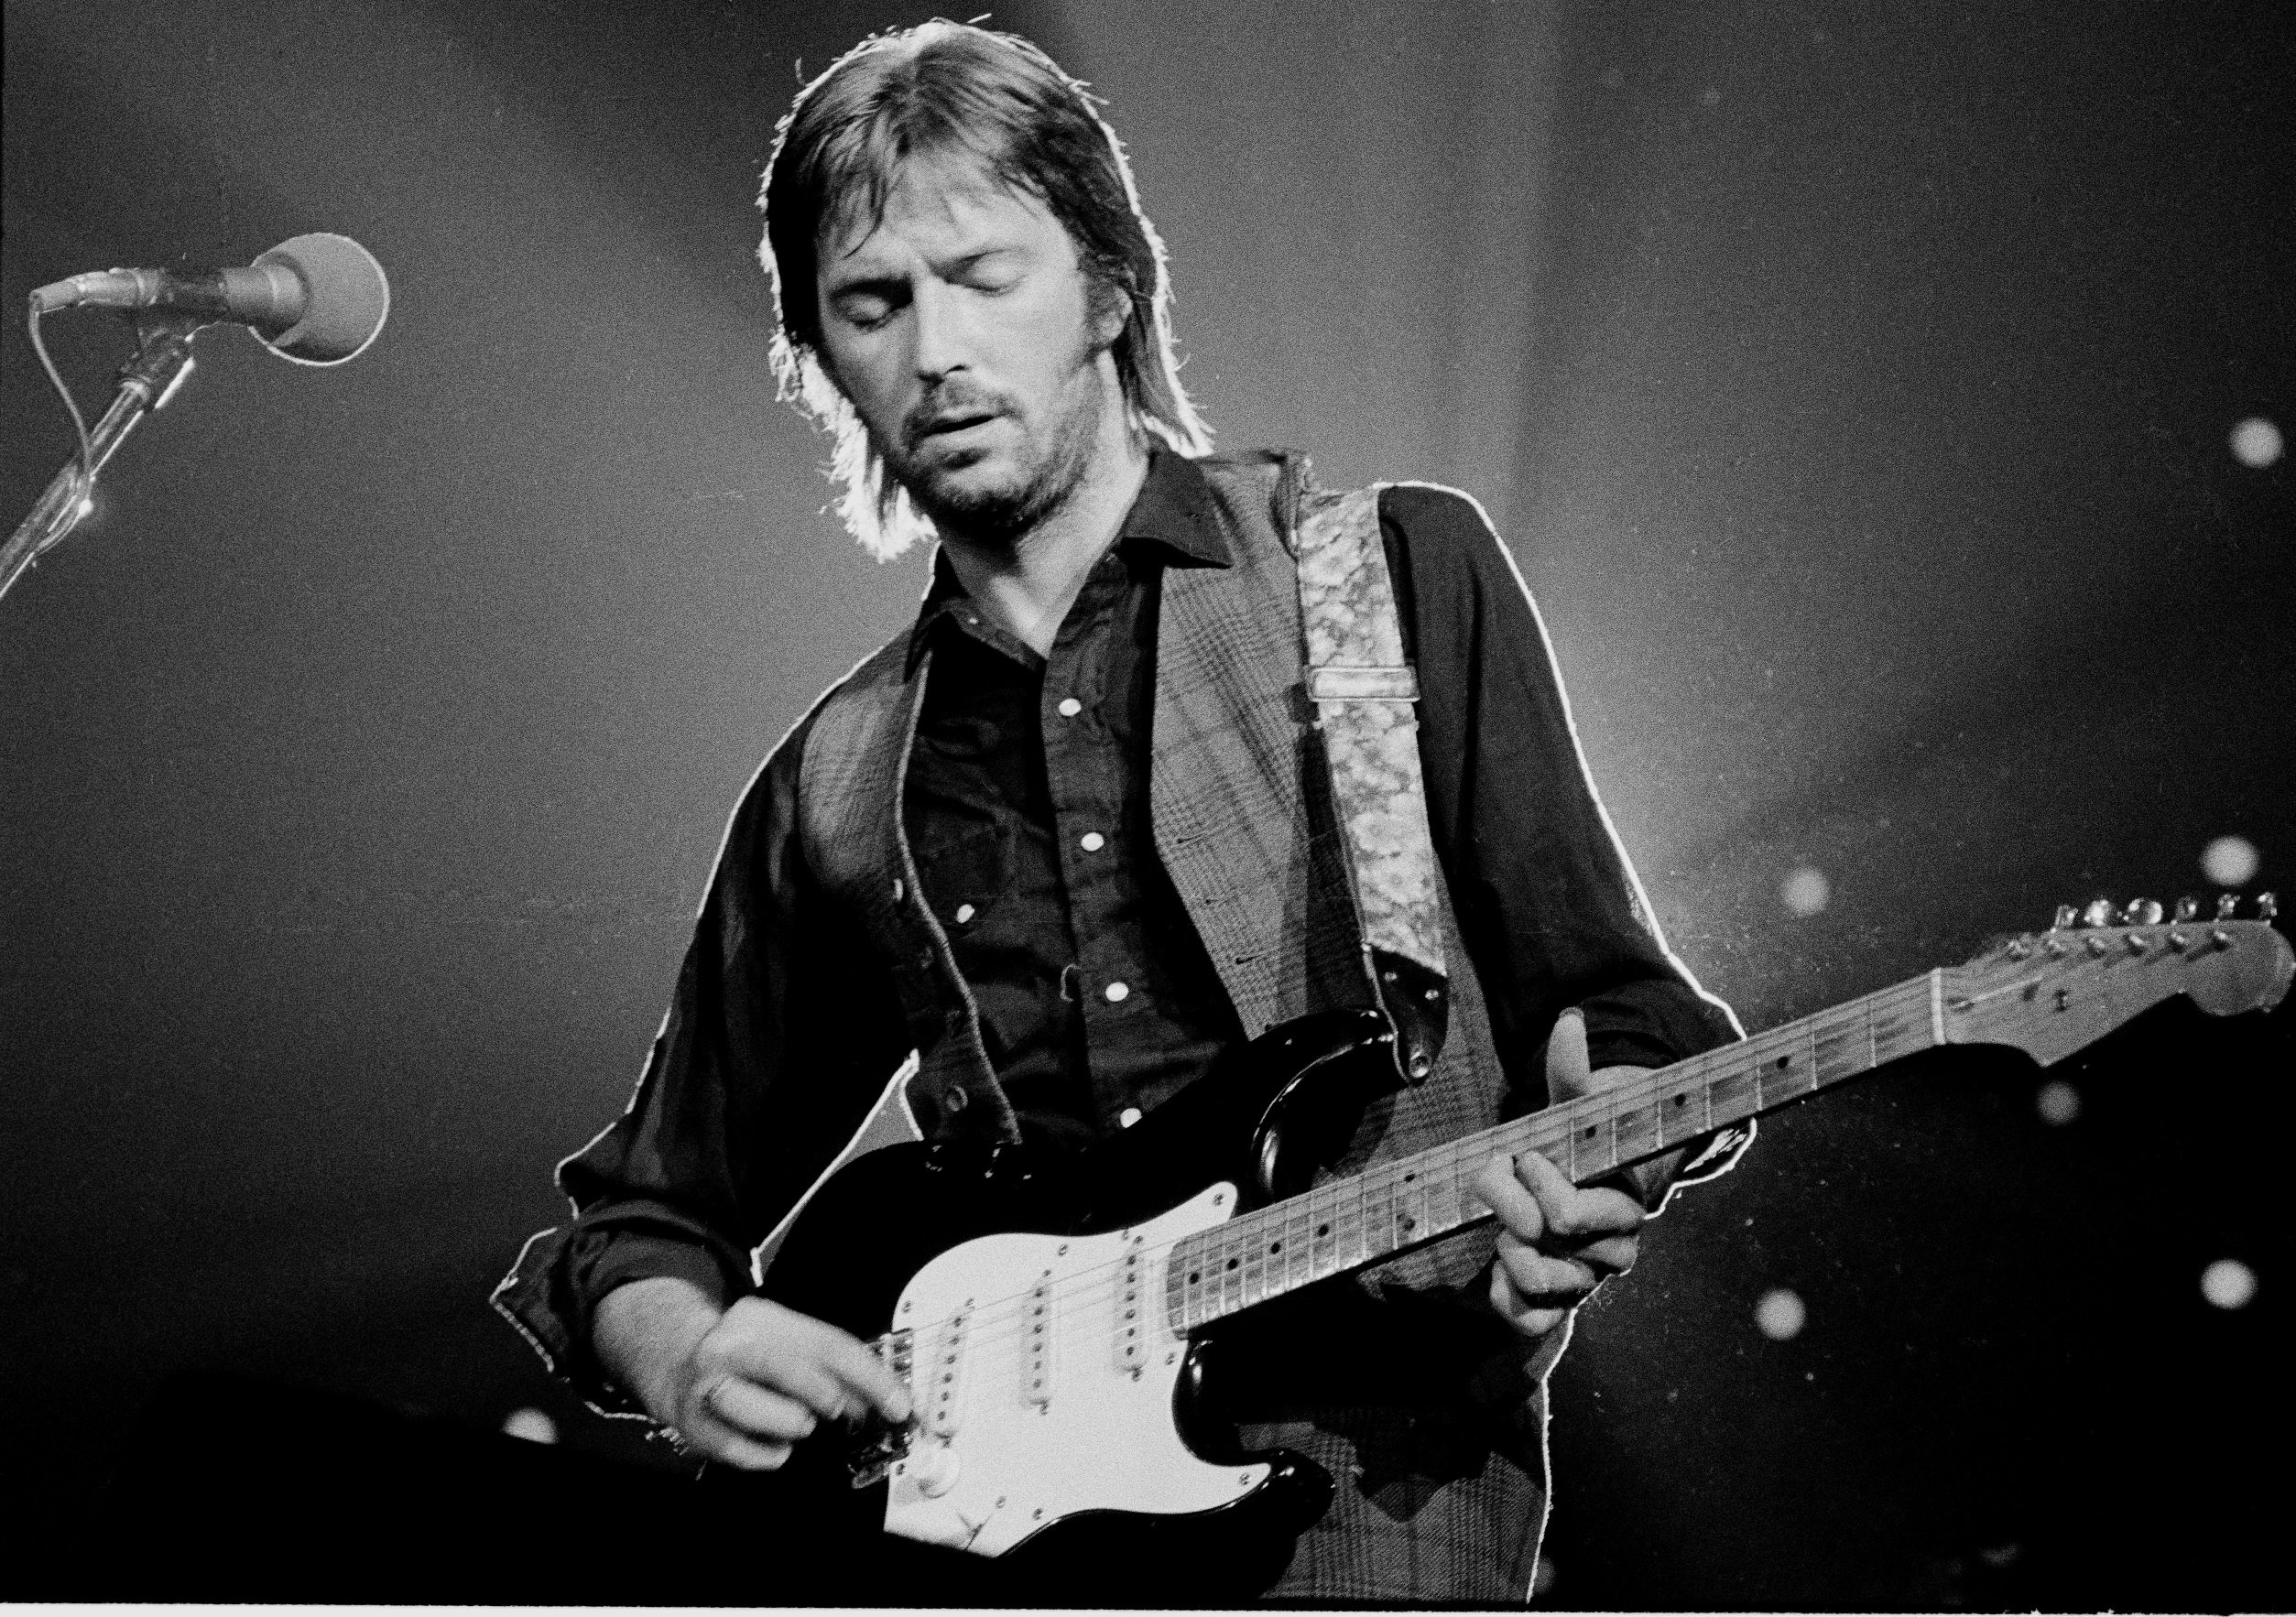 Eric Clapton playing songs on his guitar